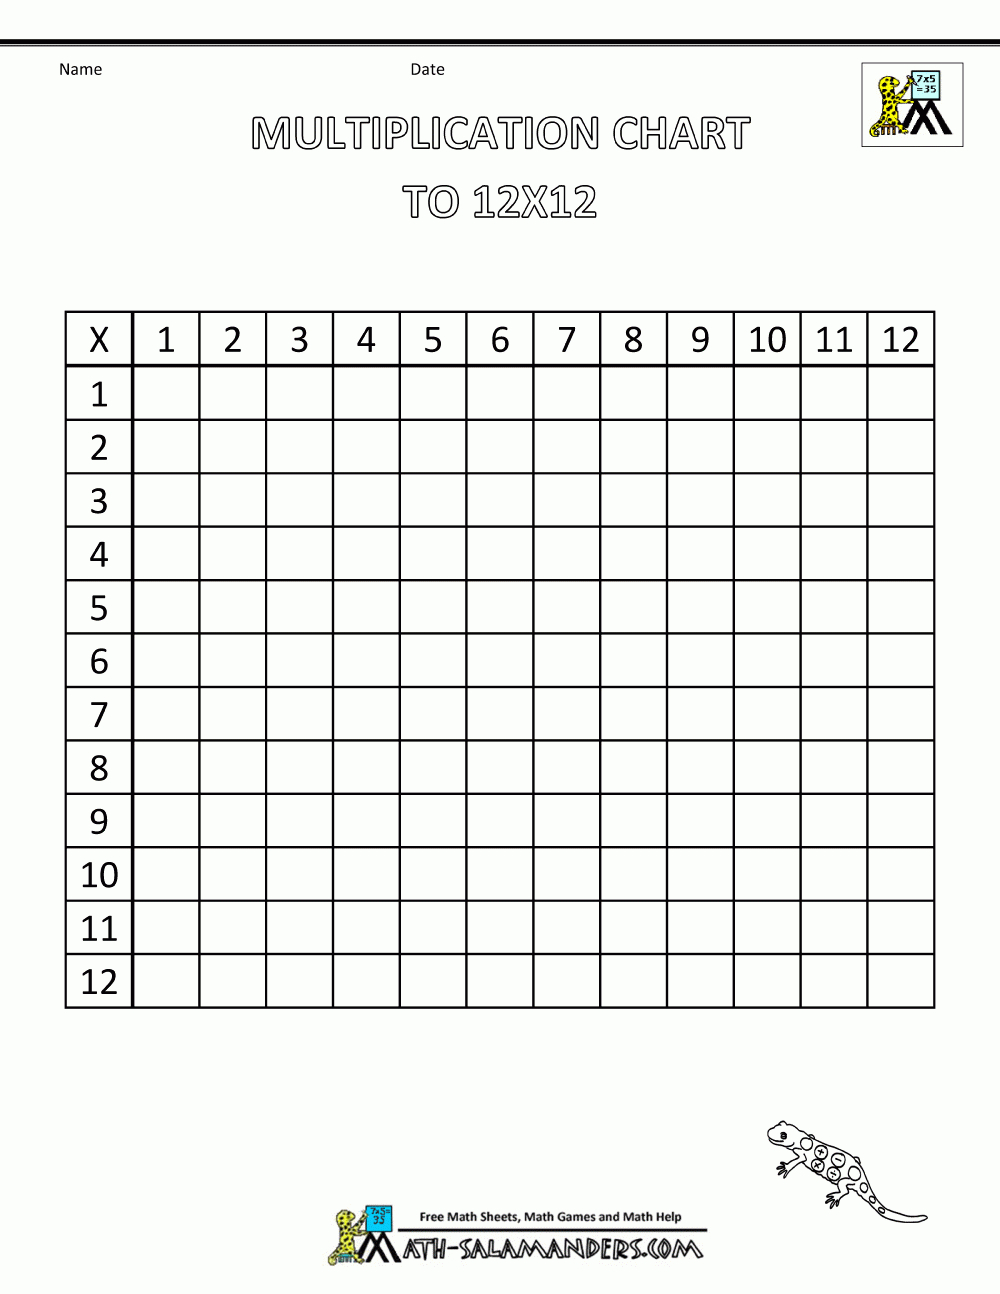 Multiplication Times Table Chart To 12X12 Blank with regard to Multiplication Worksheets Up To 12X12